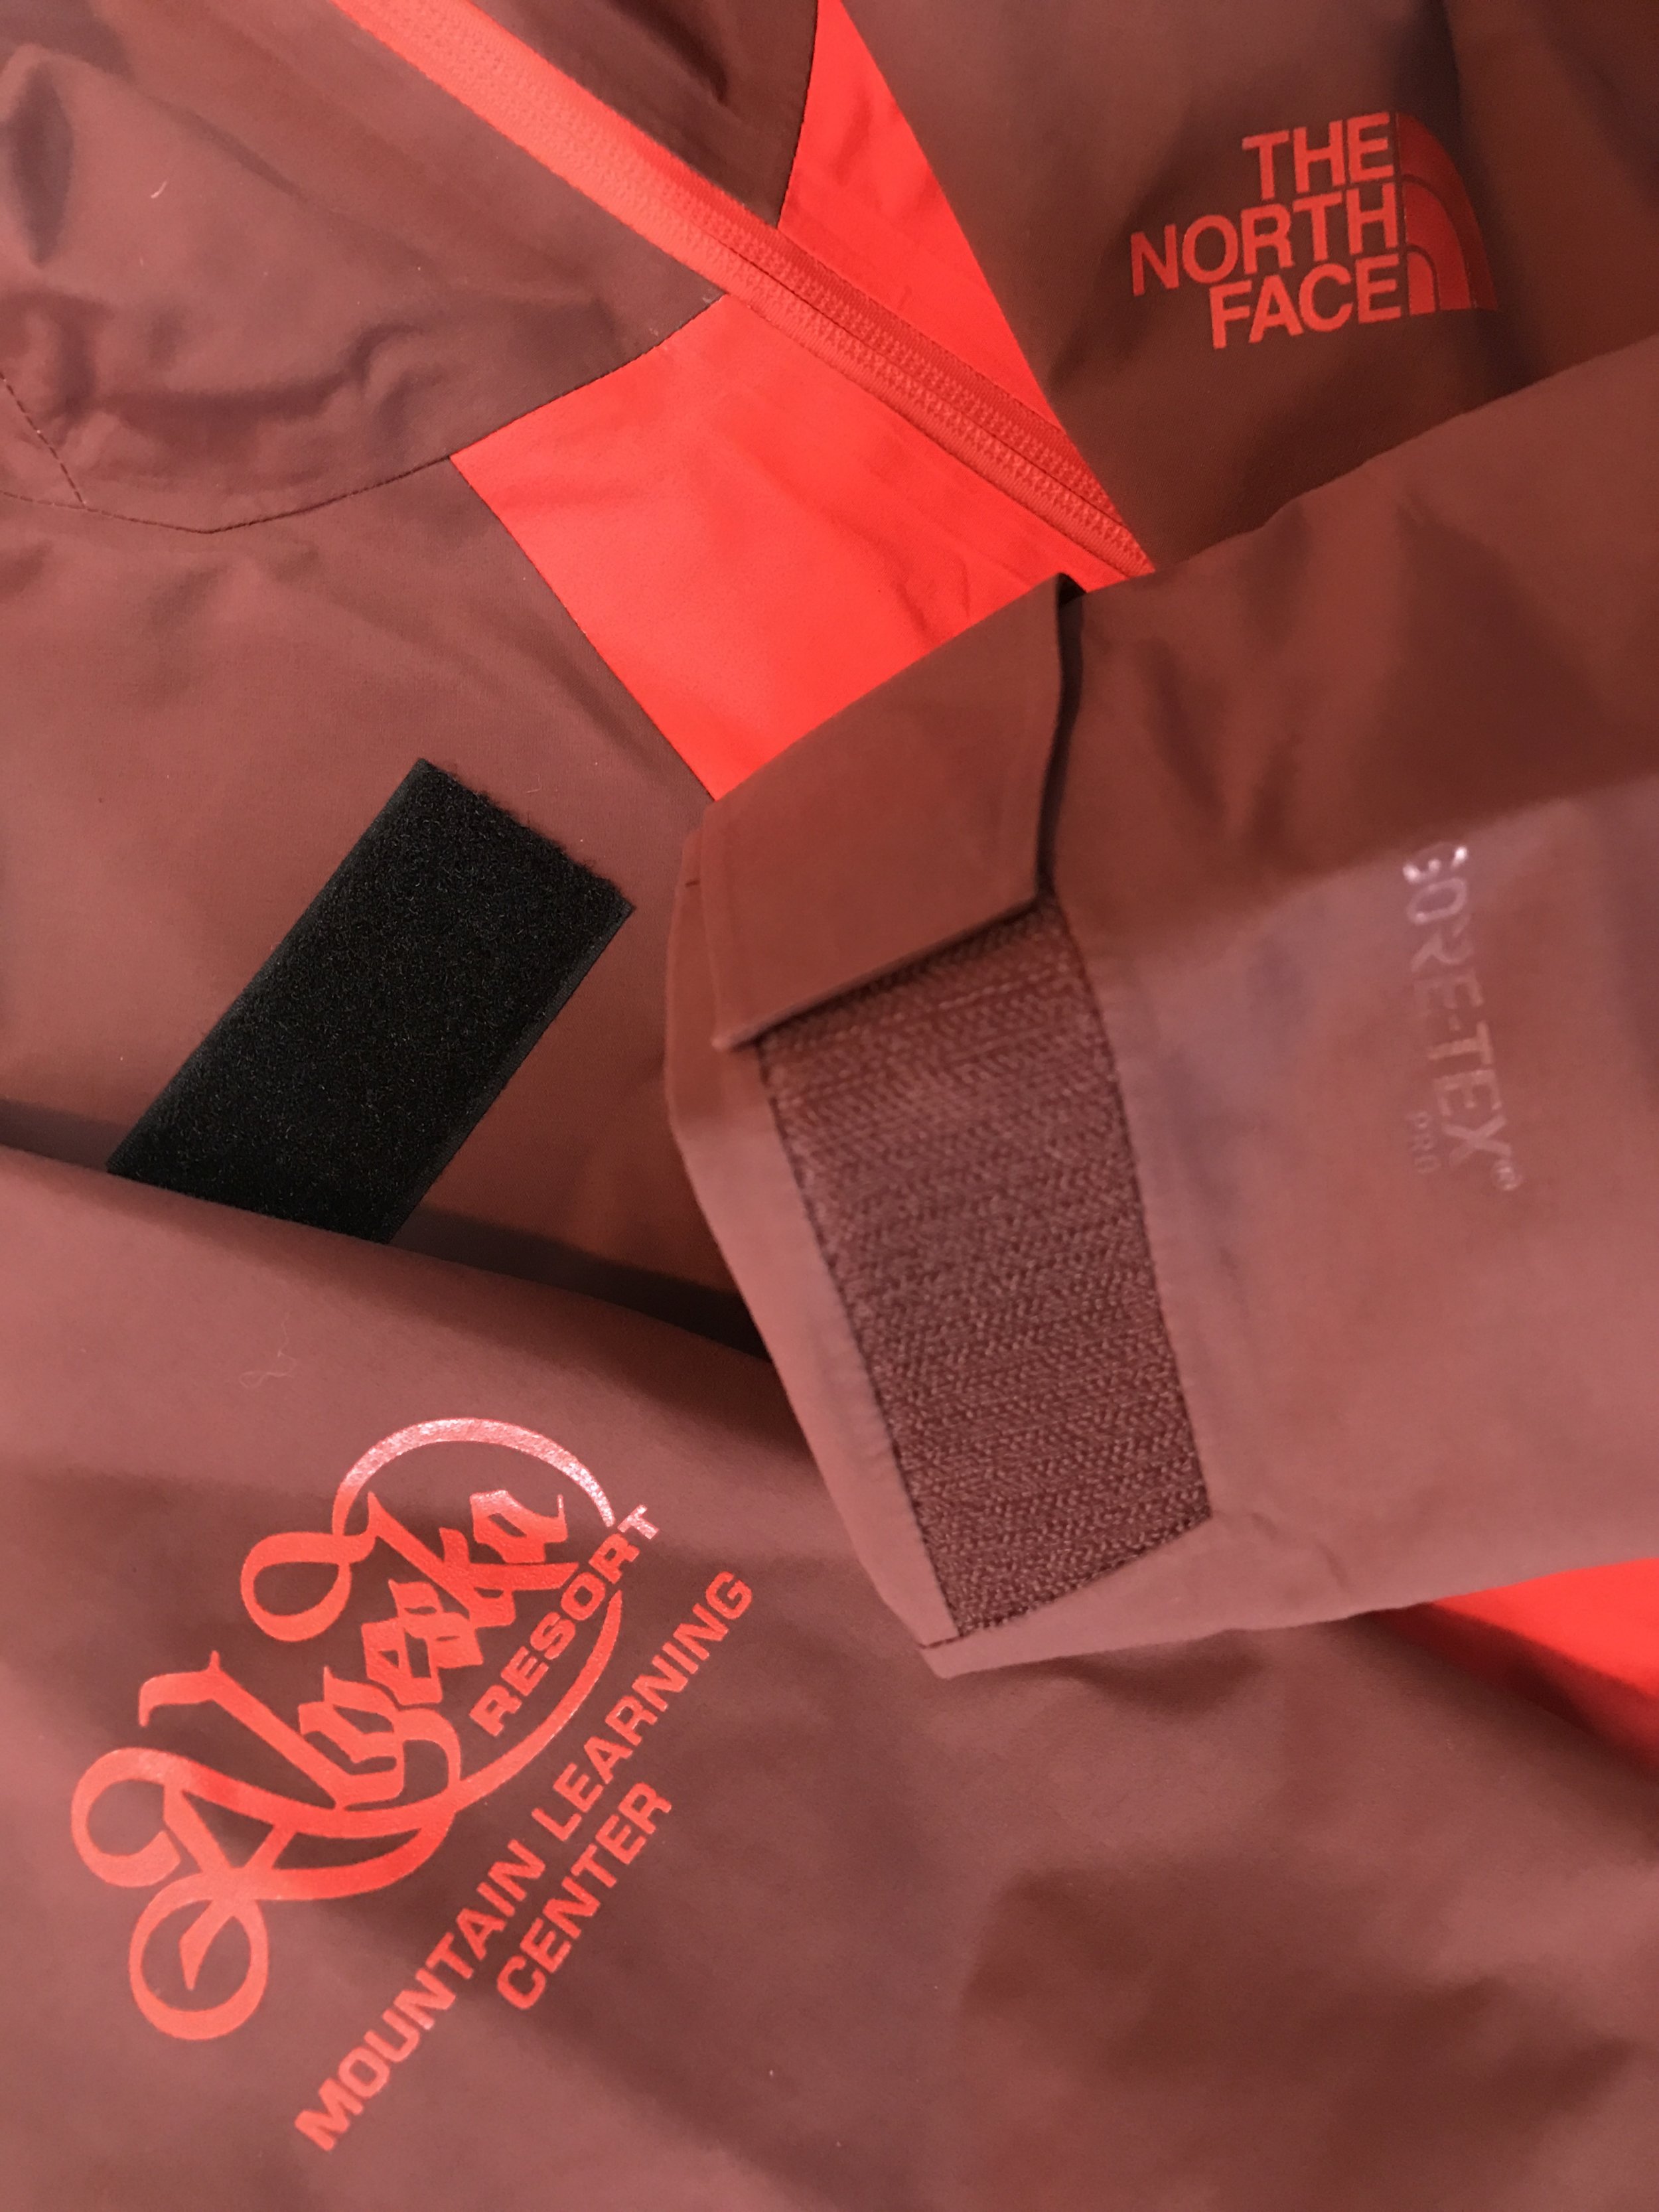 Velcro® Loop Name tags on Gore-Tex® Jackets